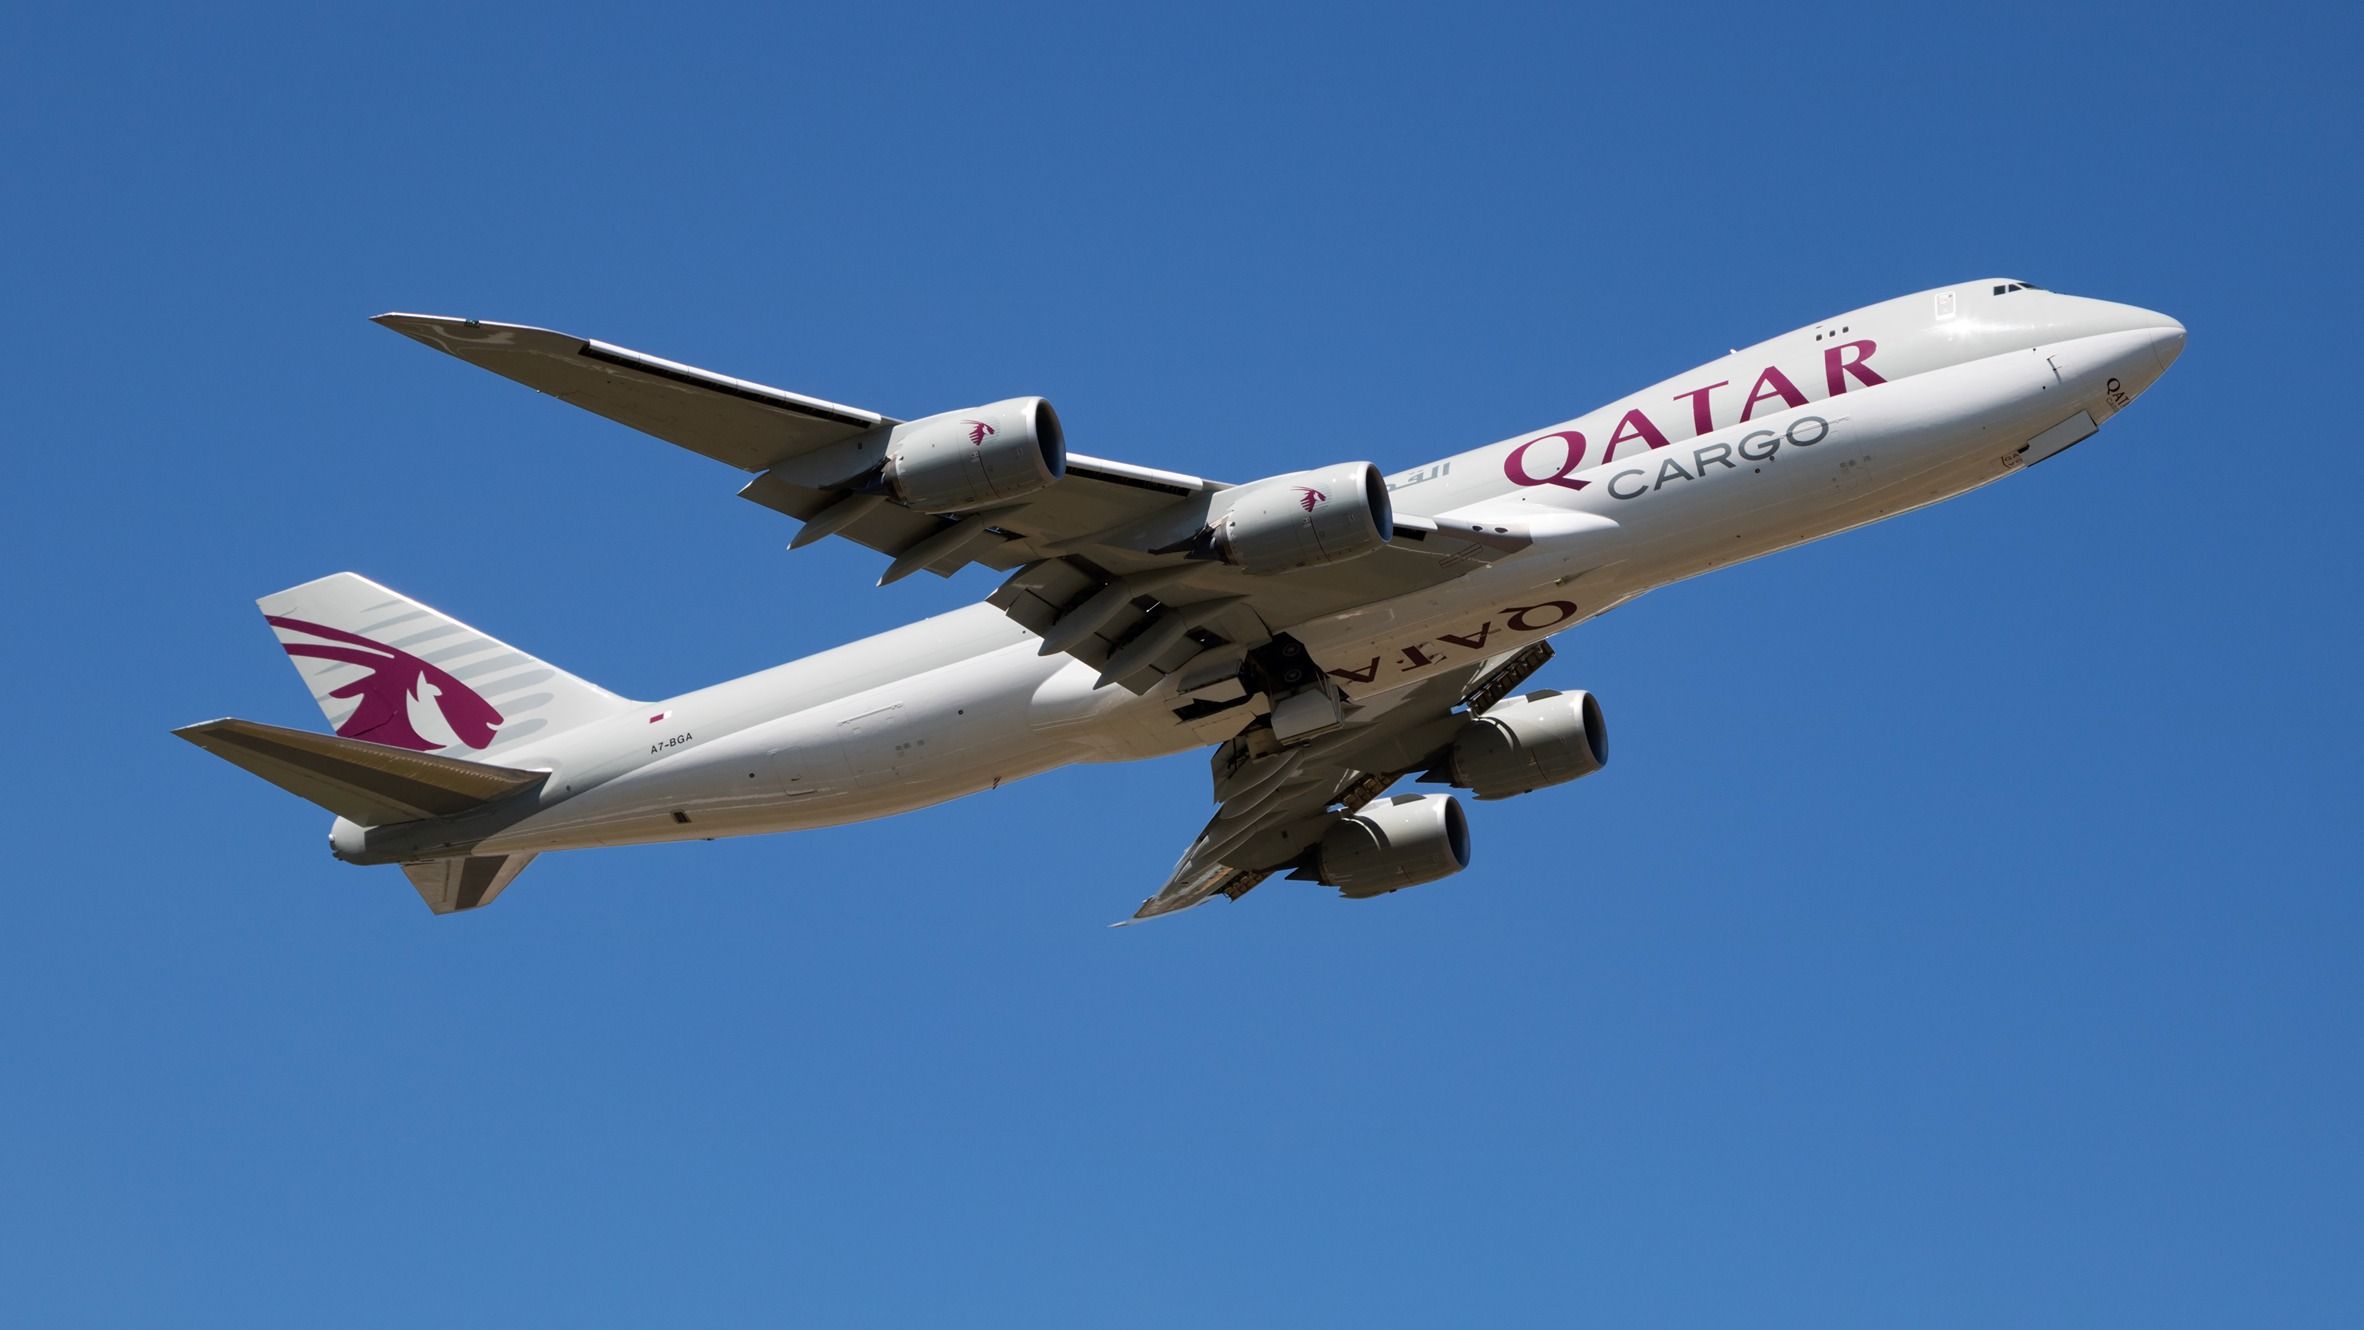 Boeing 747-8F Retirement? Qatar Airways Appears To Have Quietly 